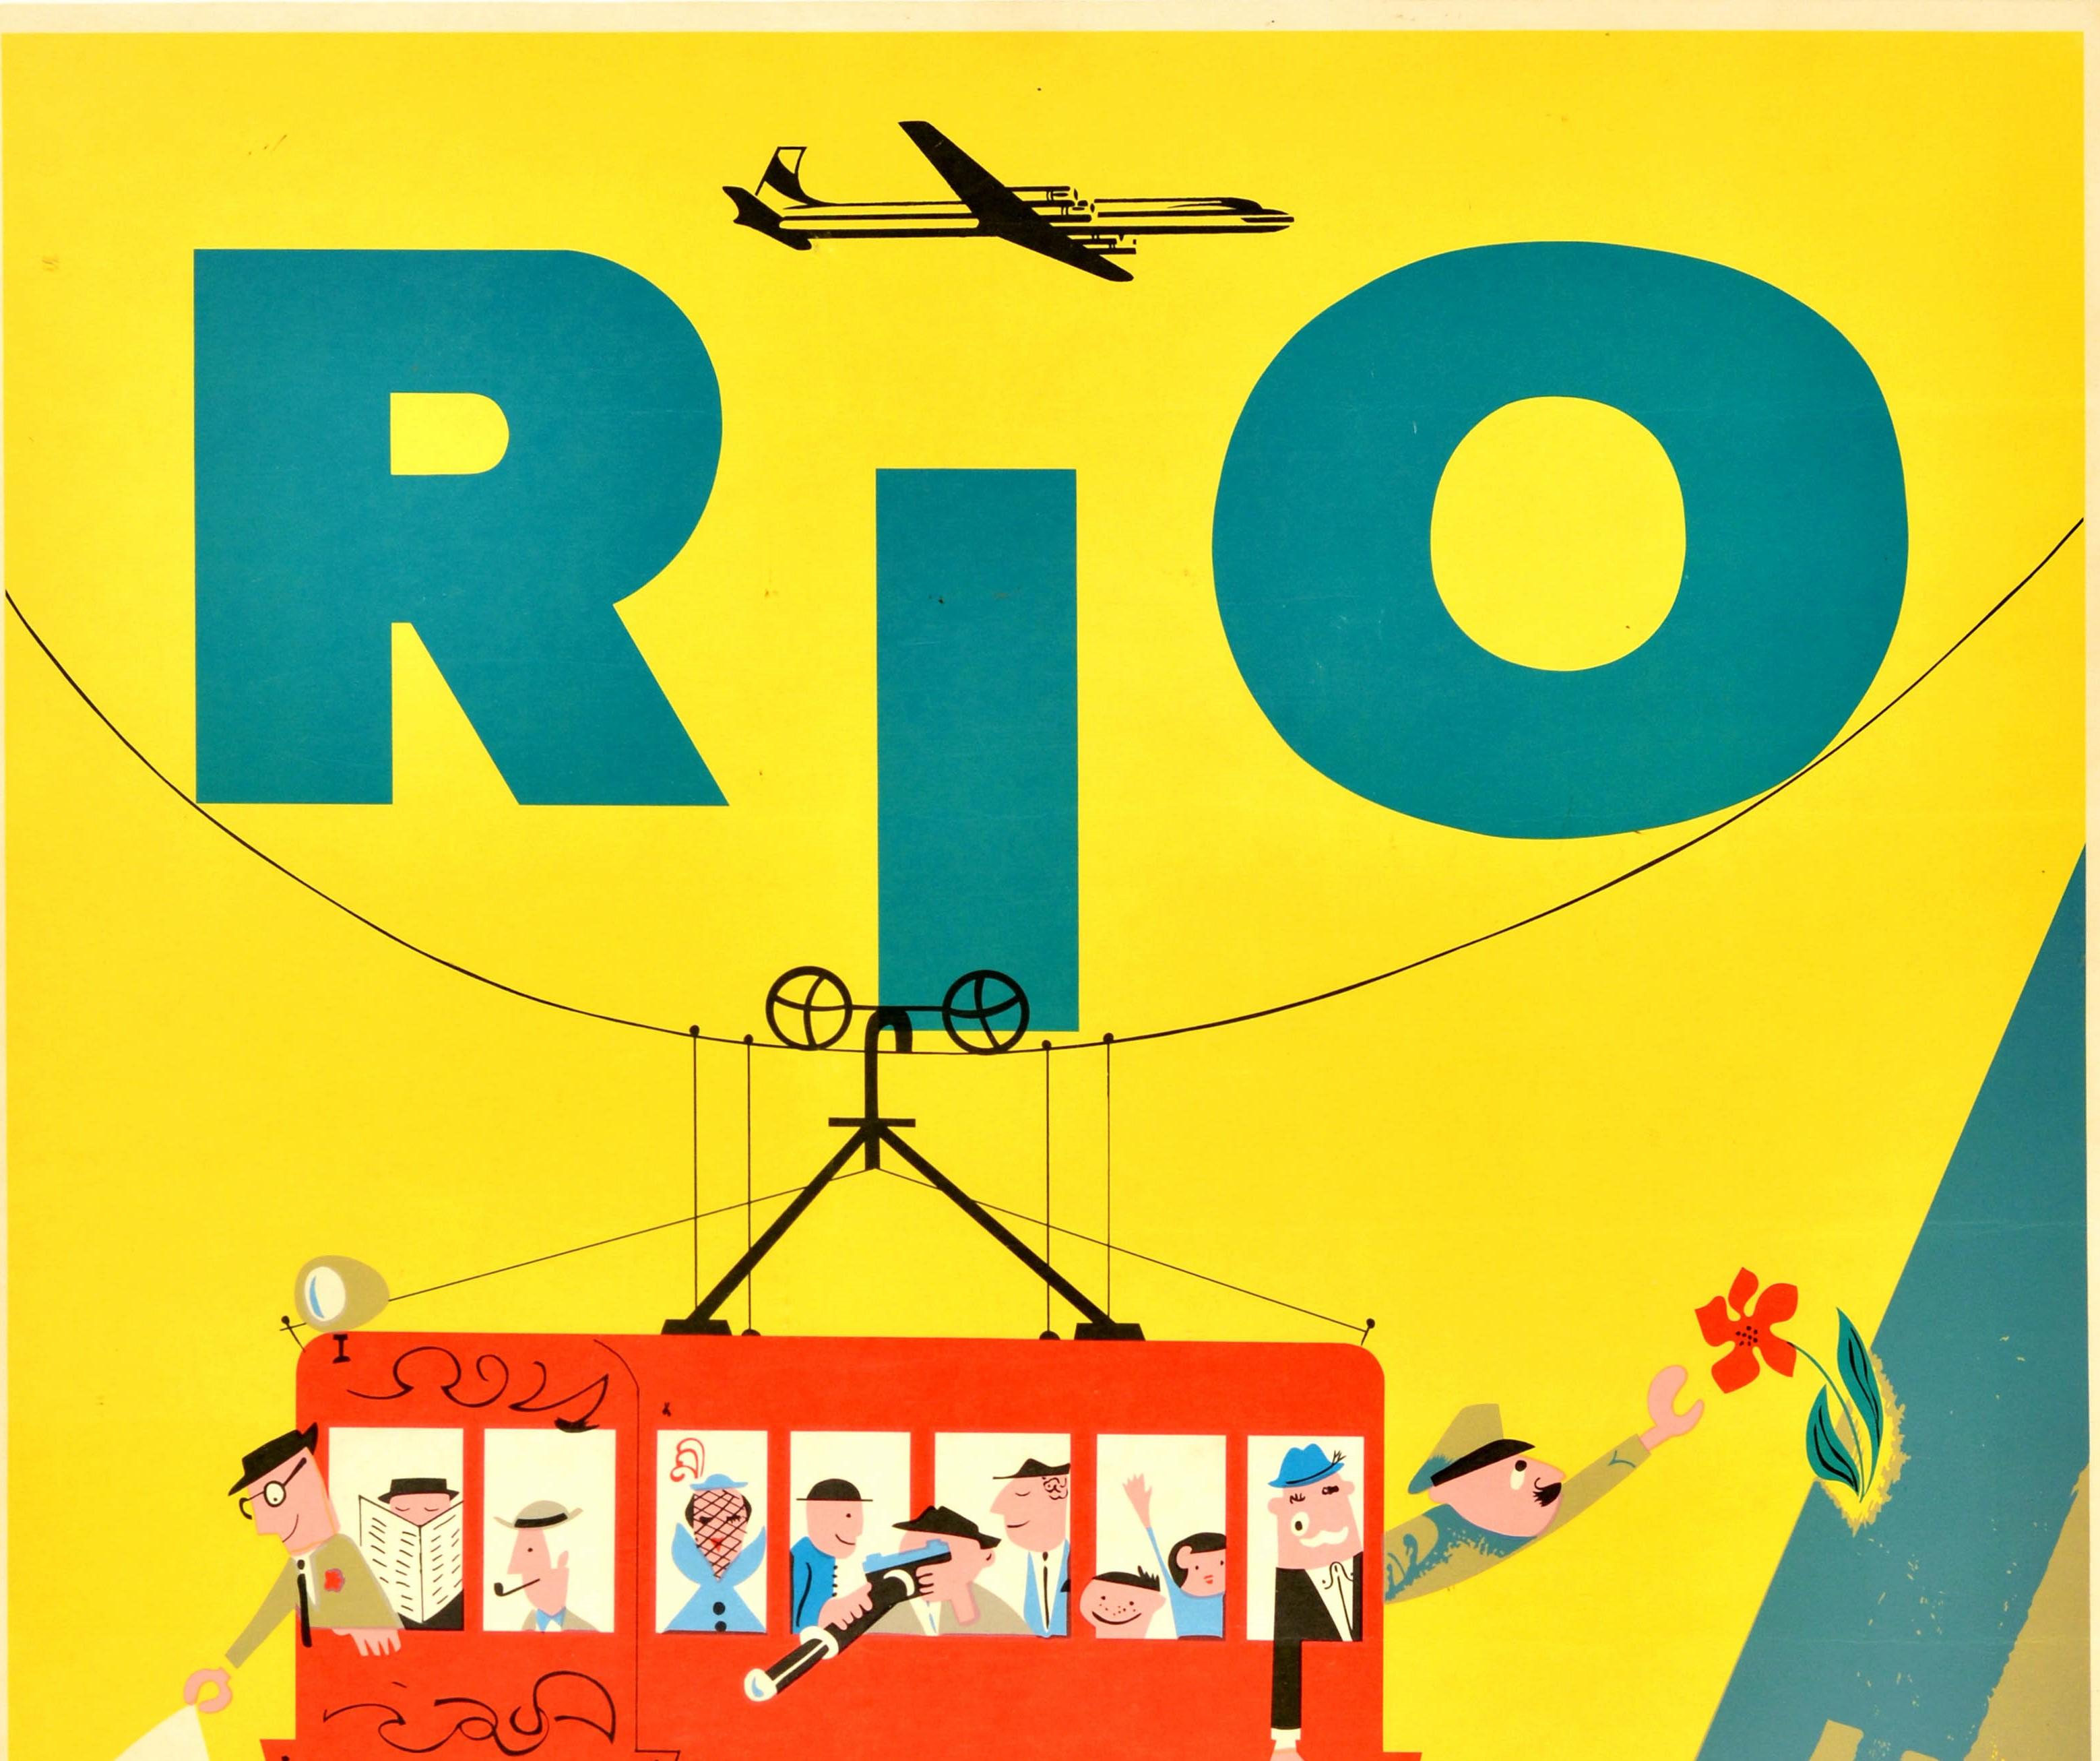 Original vintage travel poster for Rio de Janeiro issued by Braniff International Airways featuring a colourful cartoon illustration of tourists on a red cable car with people enjoying the view, a man smoking a pipe and another reading a newspaper,